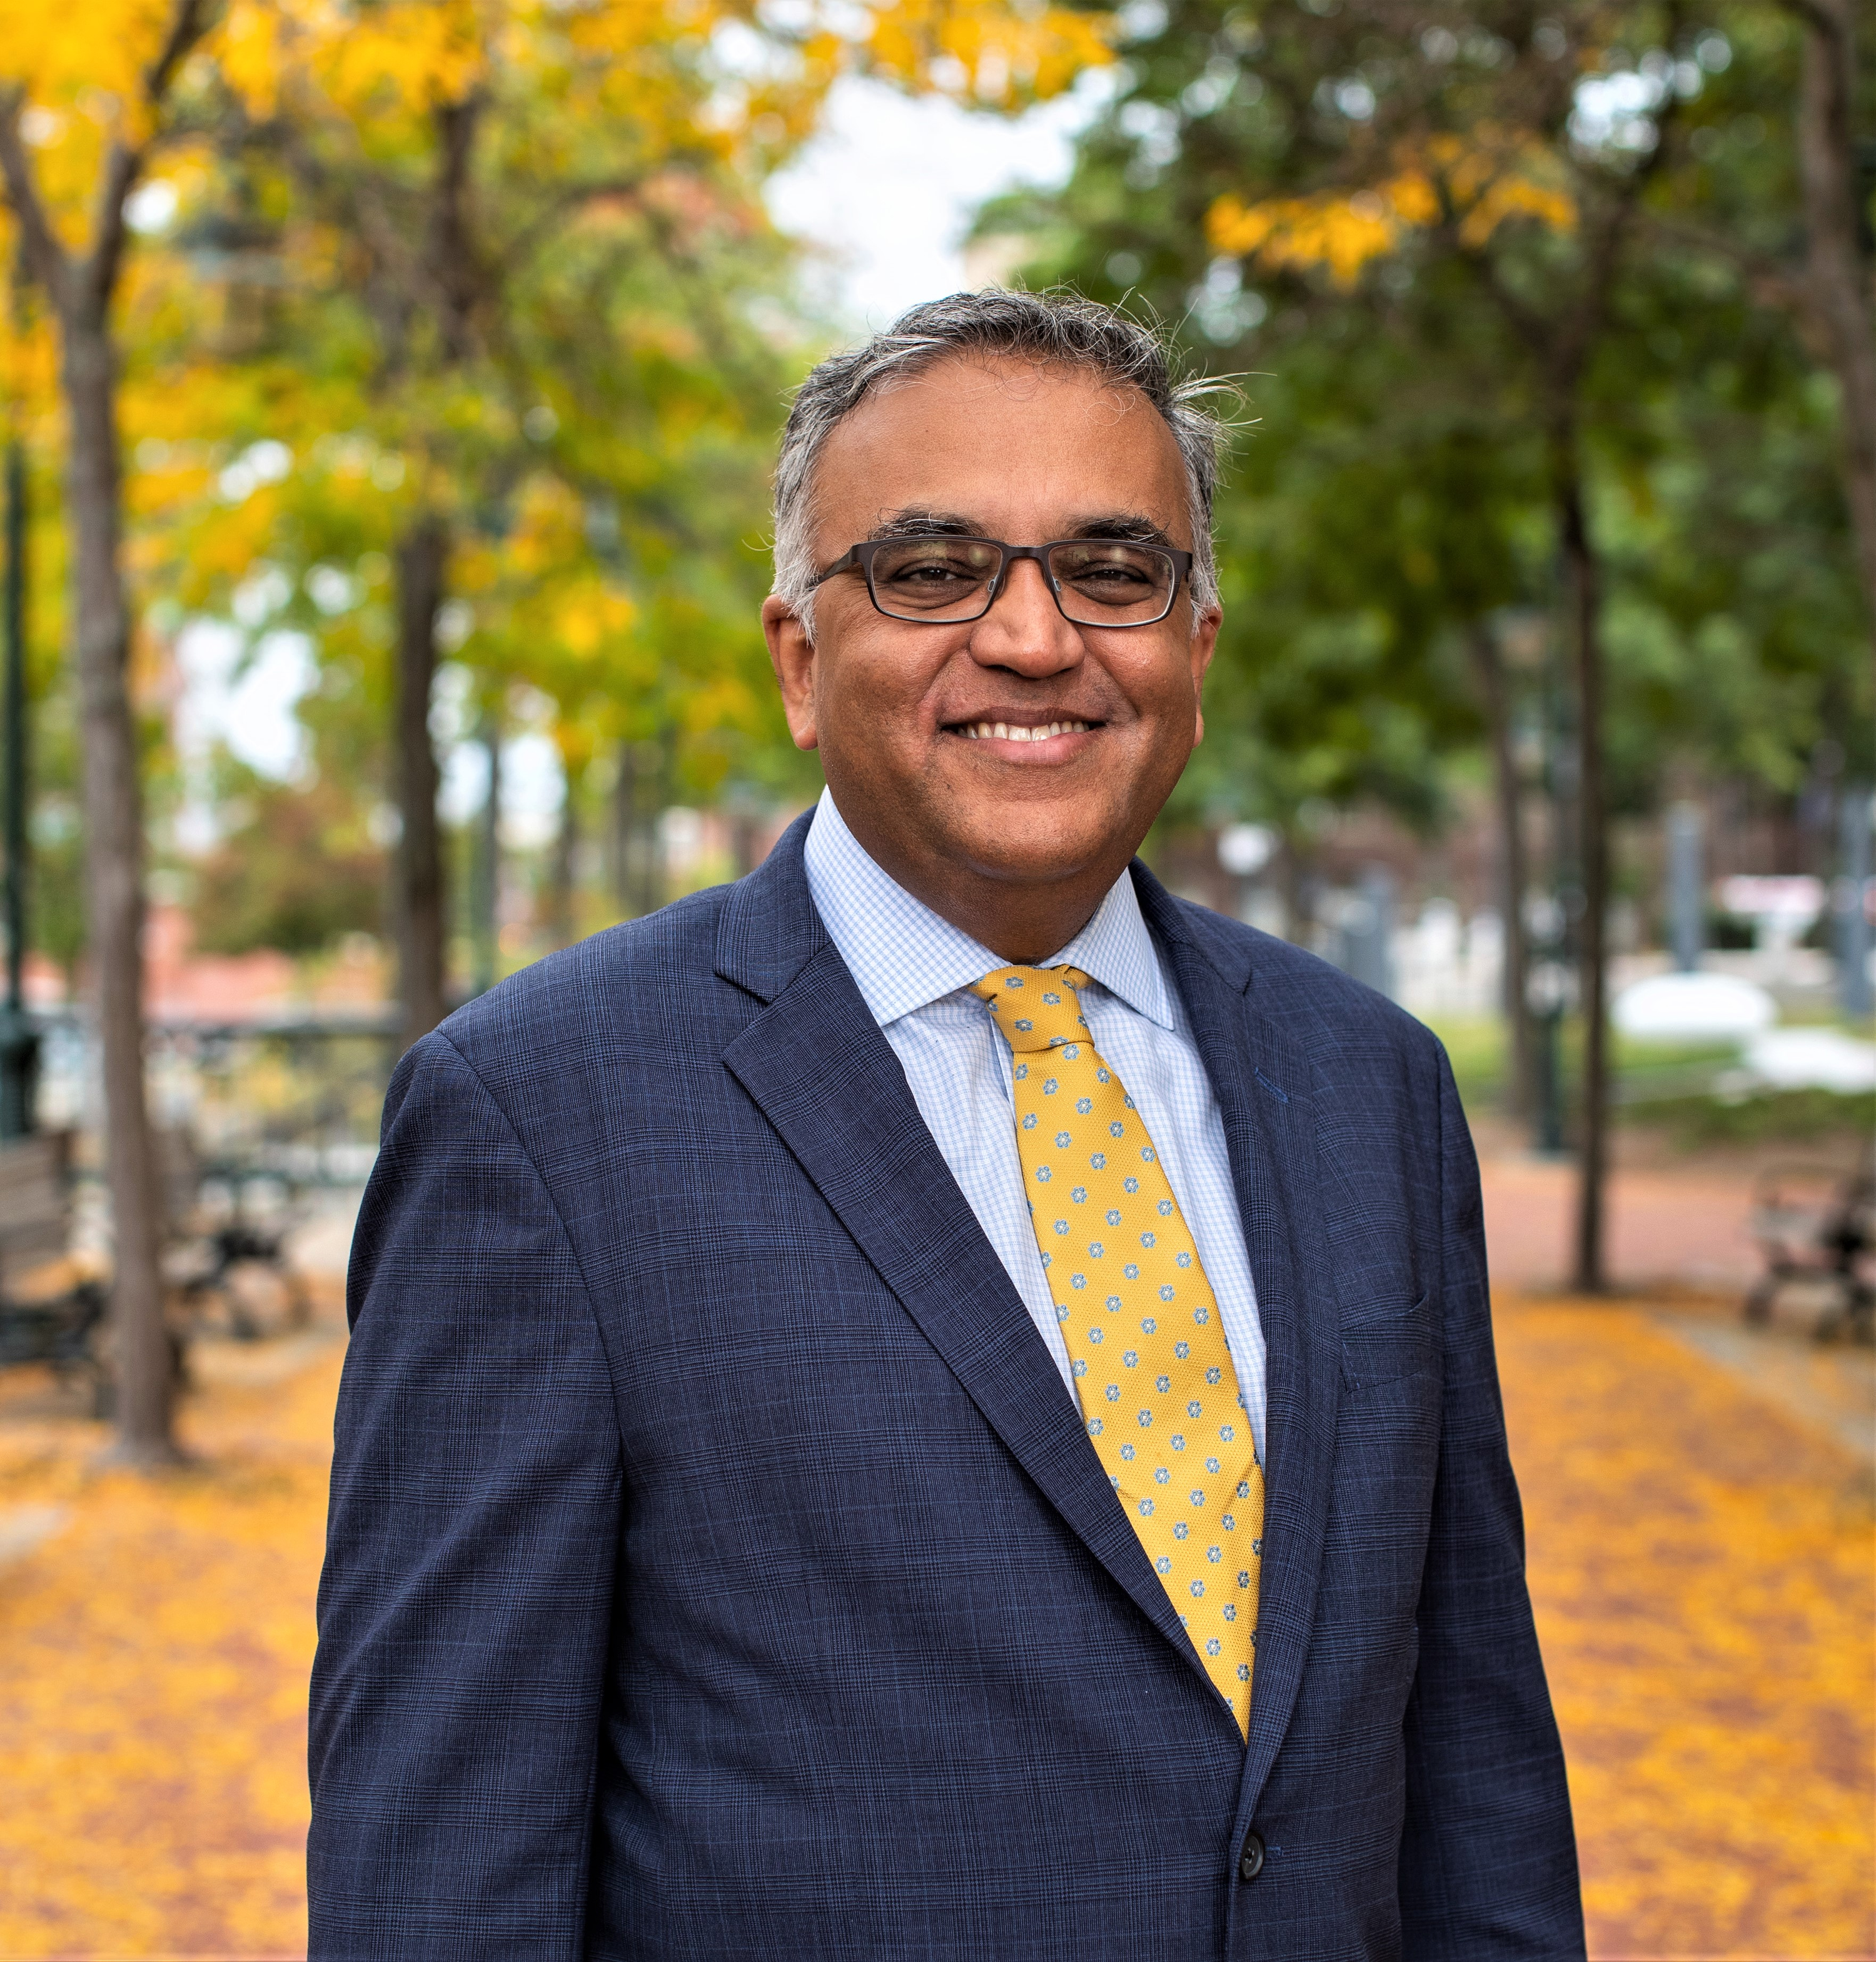 Welcome to Episode 39 of “COVID: What comes next,” an exclusive weekly Providence Journal/USA TODAY NETWORK podcast featuring Dr. Ashish Jha, dean of the Brown University School of Public Health and an internationally respected expert on pandemic response and preparedness